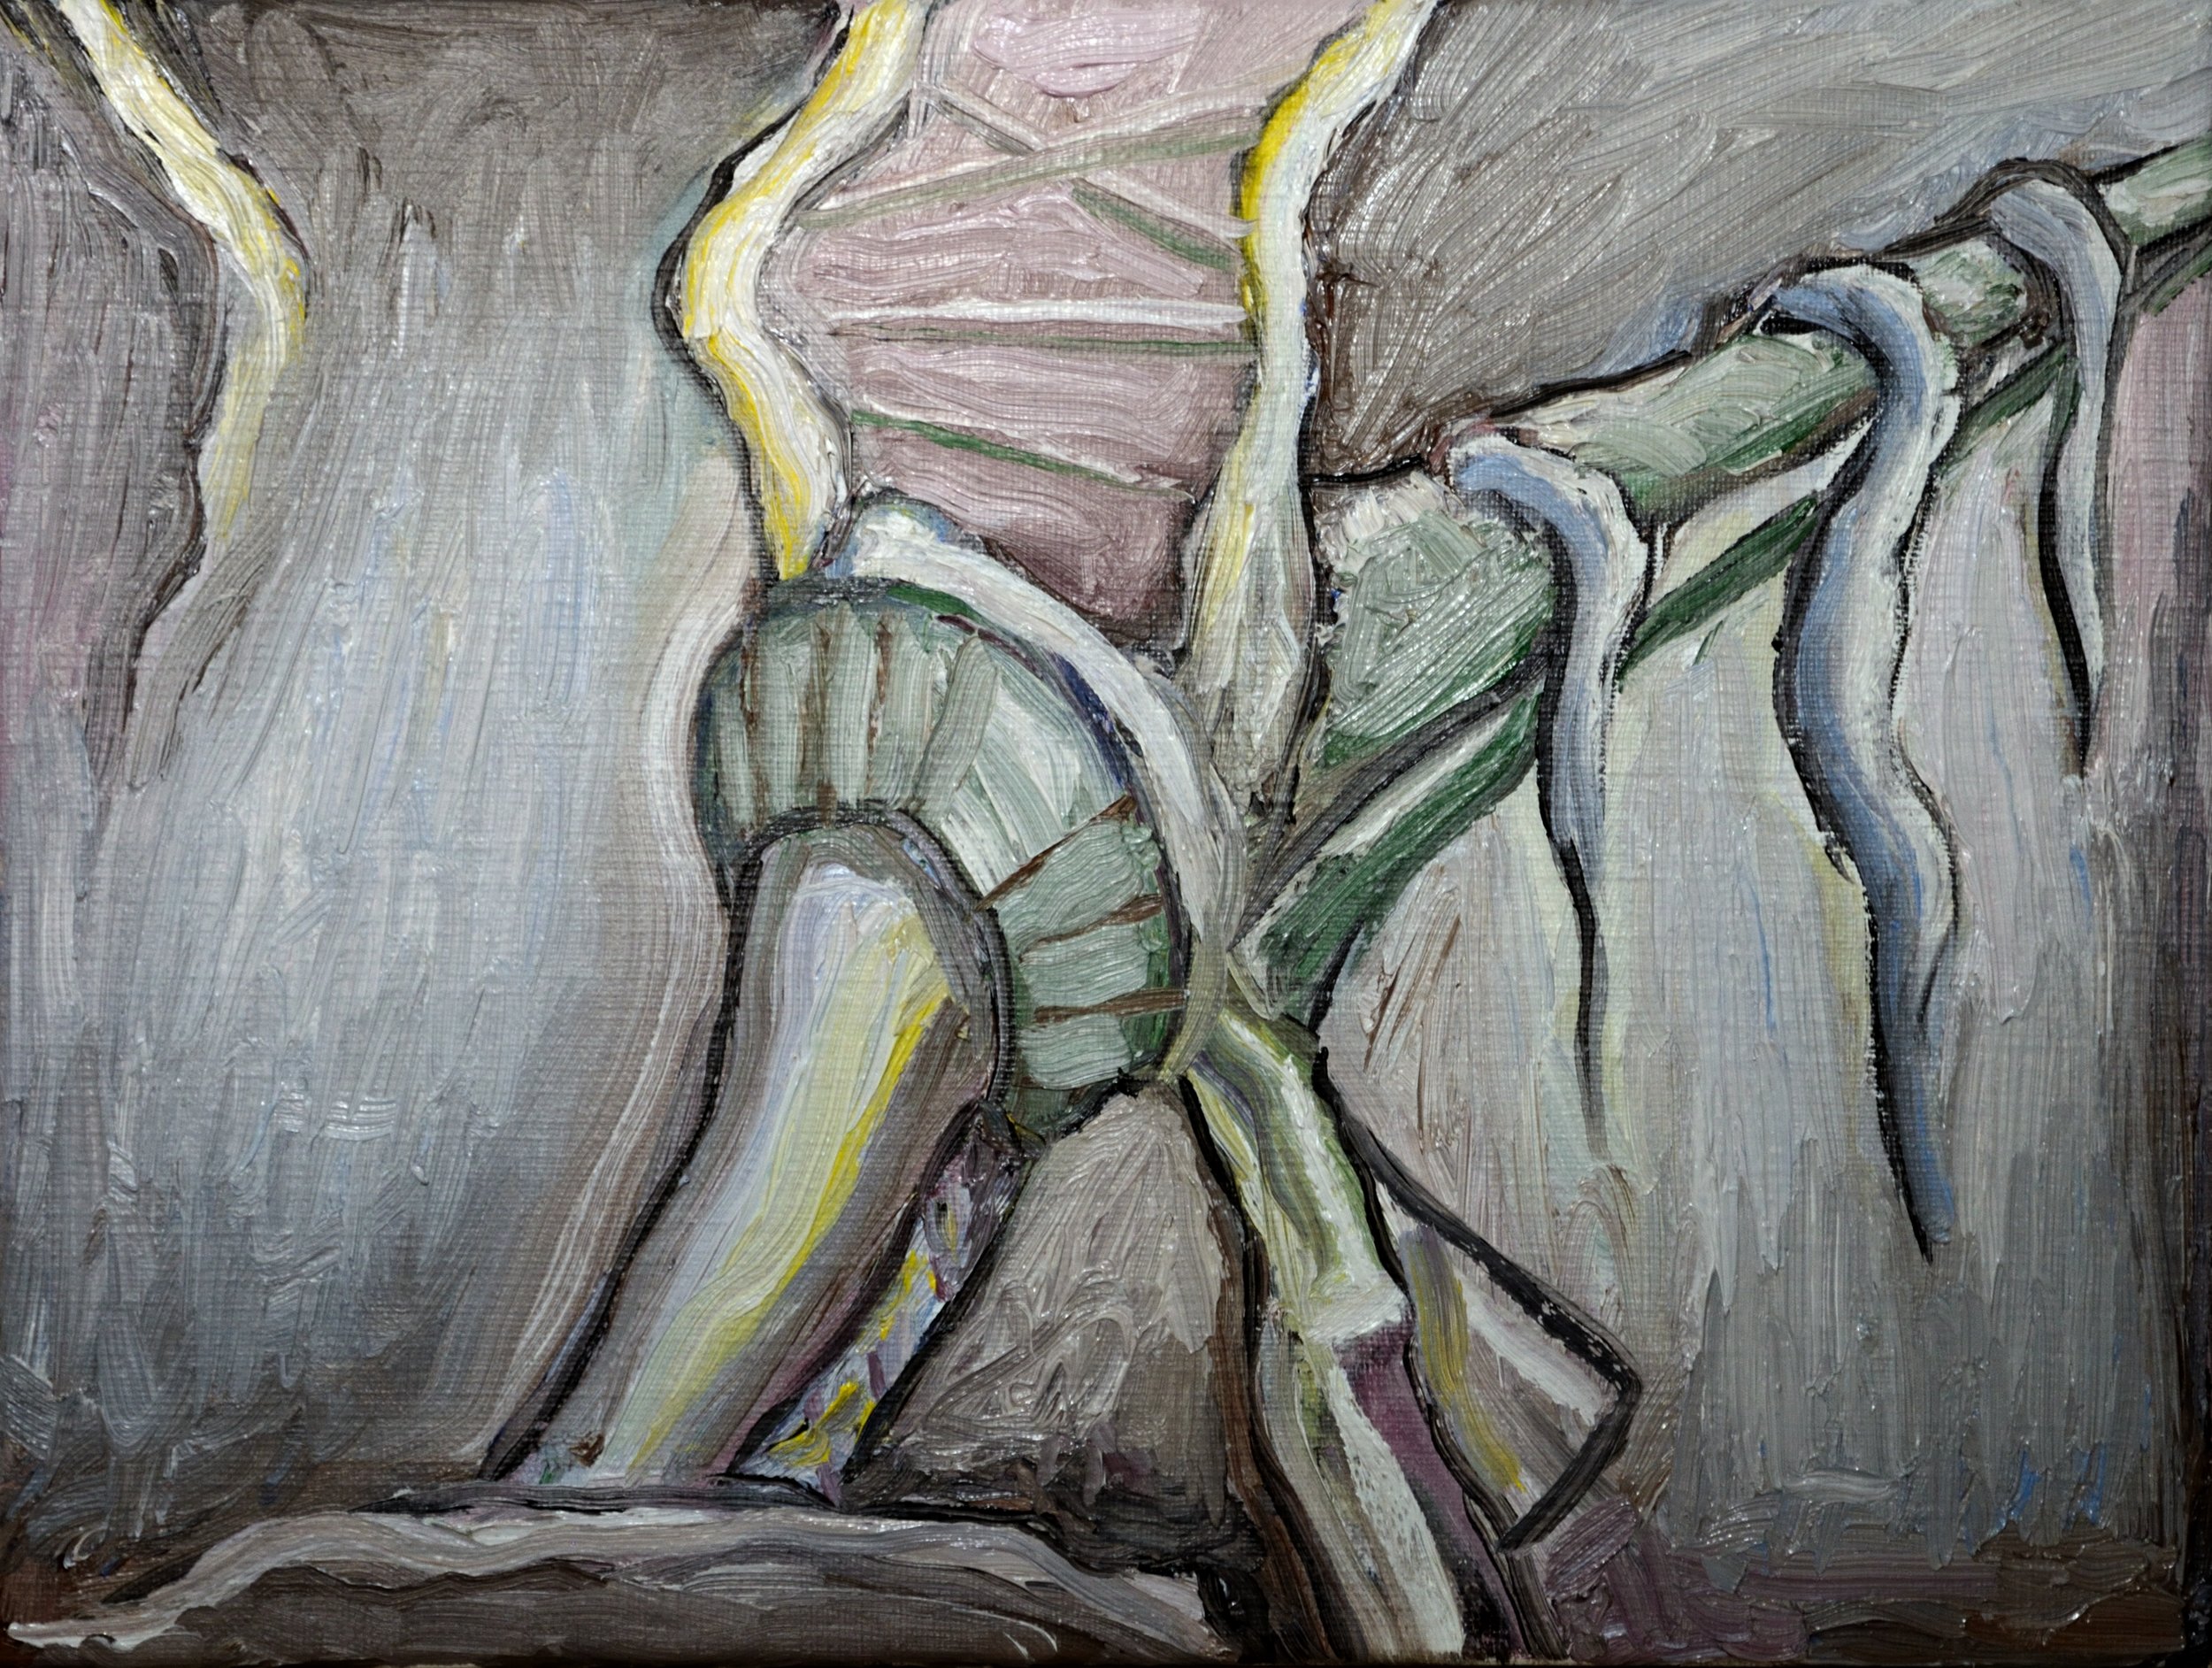 The Transfixing Experience, 50x65cm oil on canvas